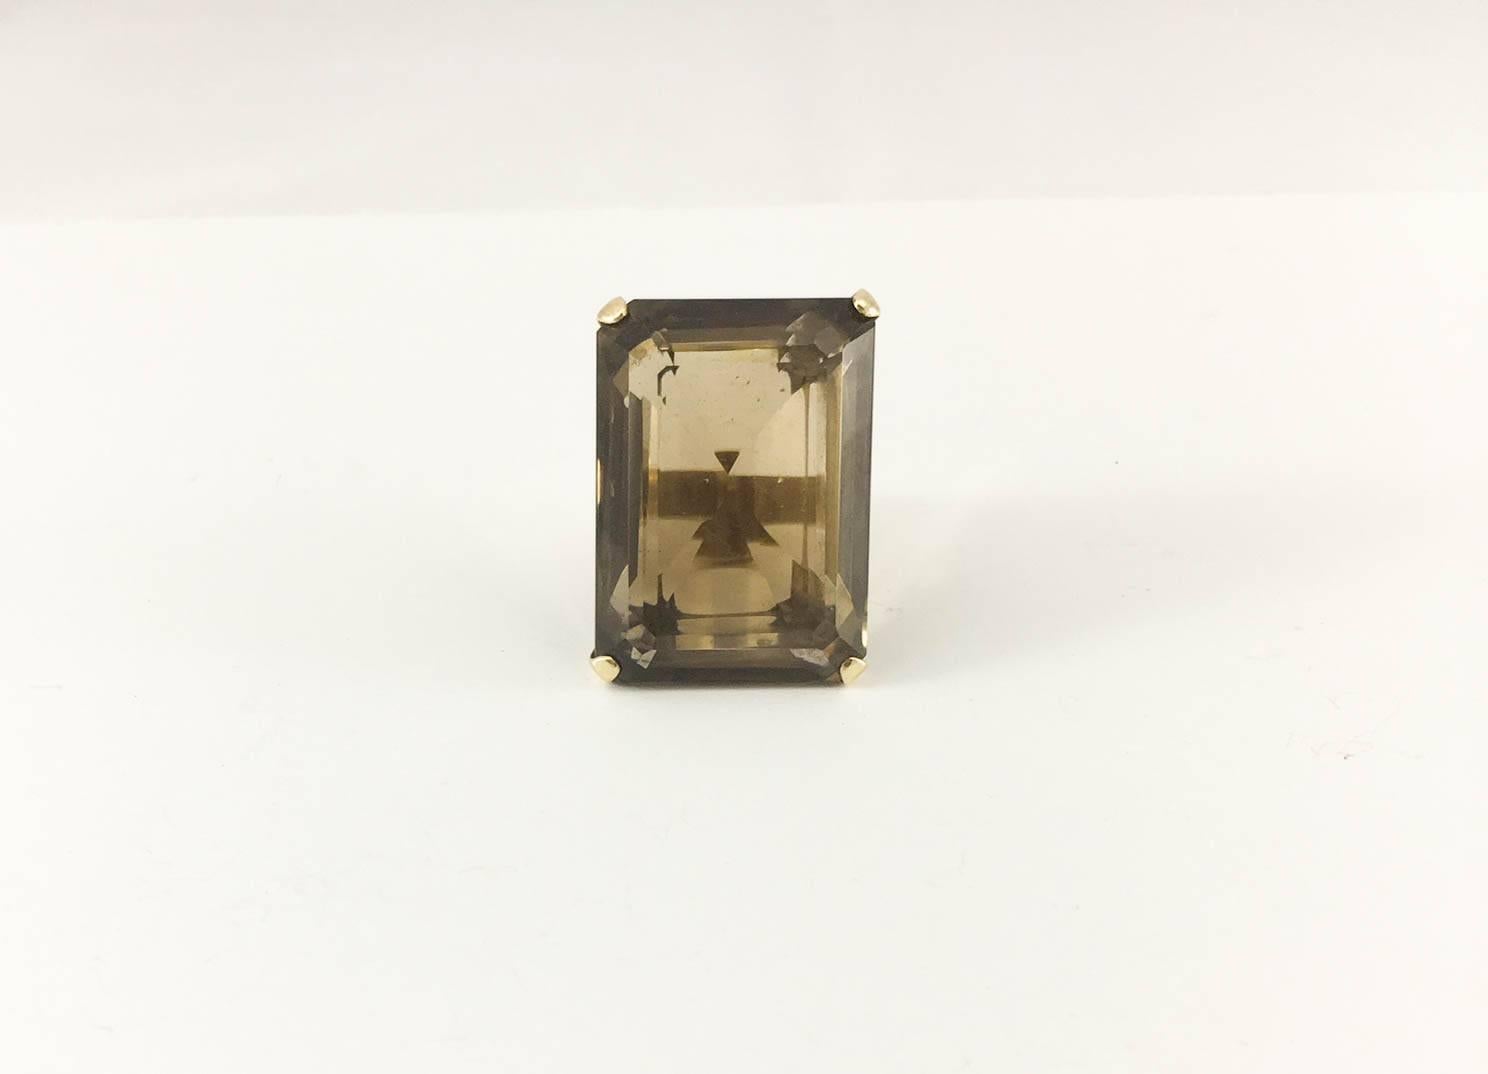 Large Smoky Quartz and Gold Statement Ring - 1960s In Excellent Condition For Sale In London, Chelsea